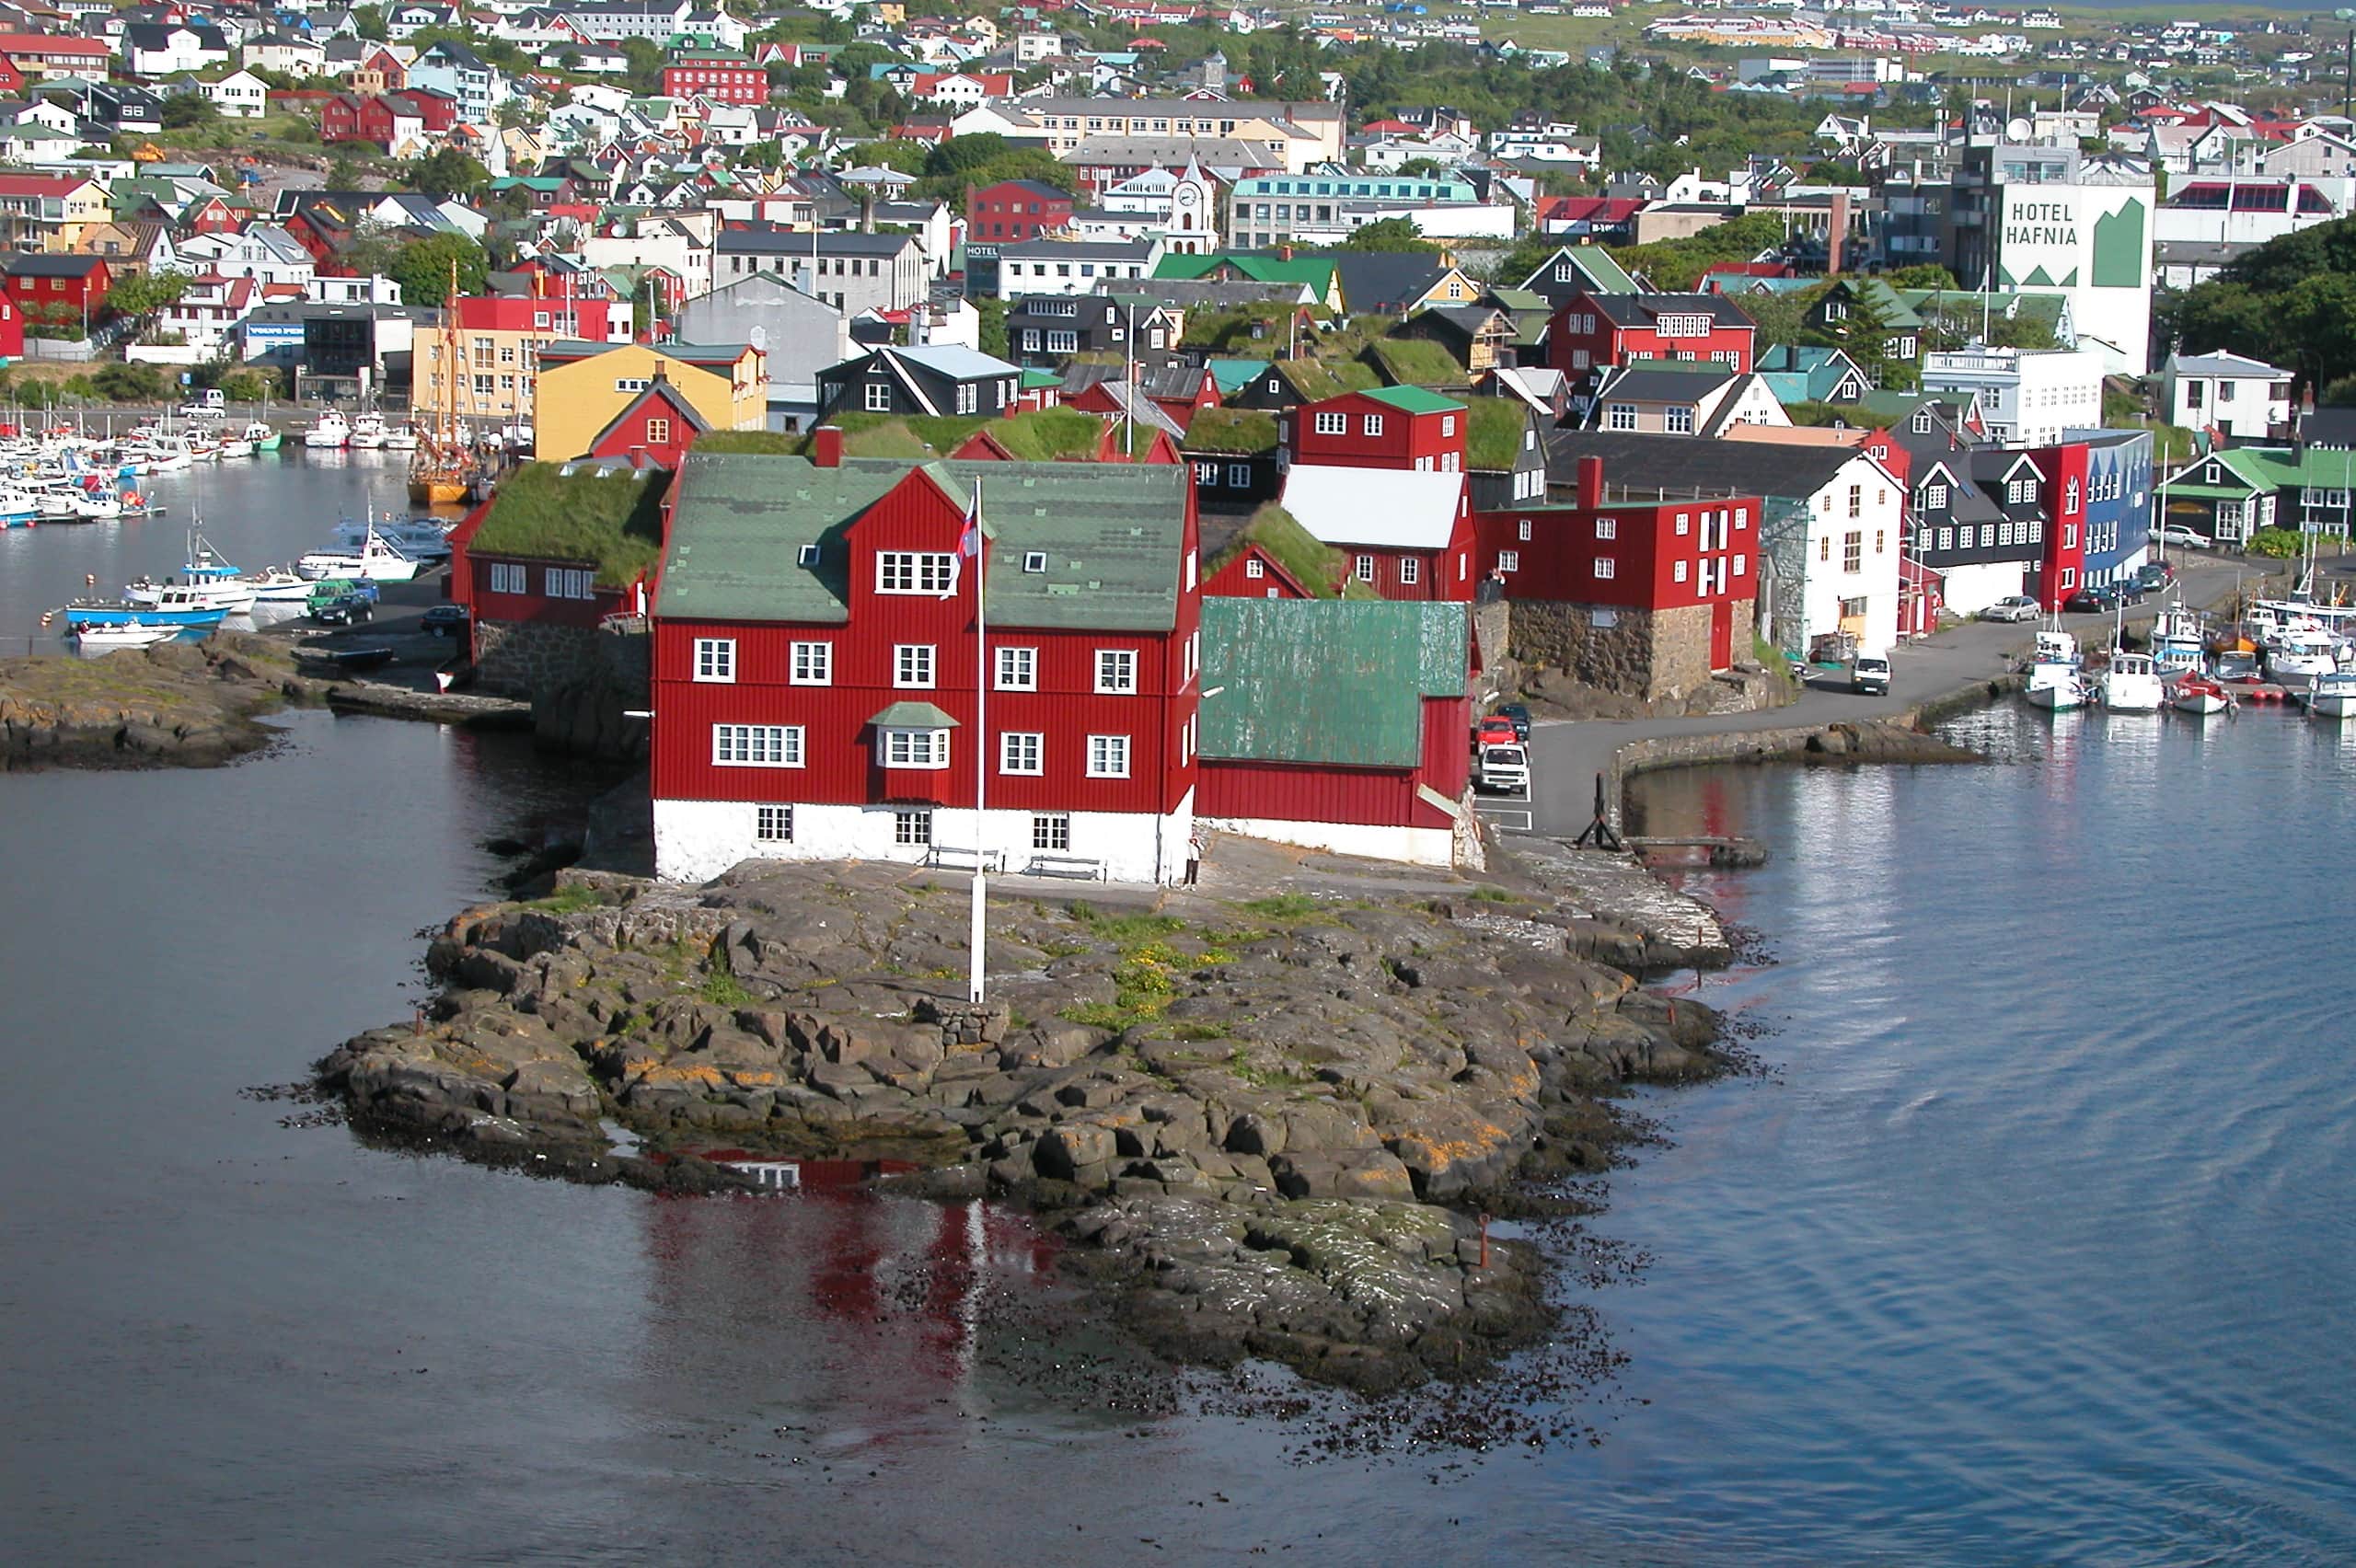 A view of the government buildings and the Faeroese Parliament in the Faroe Islands capital Tórshavn